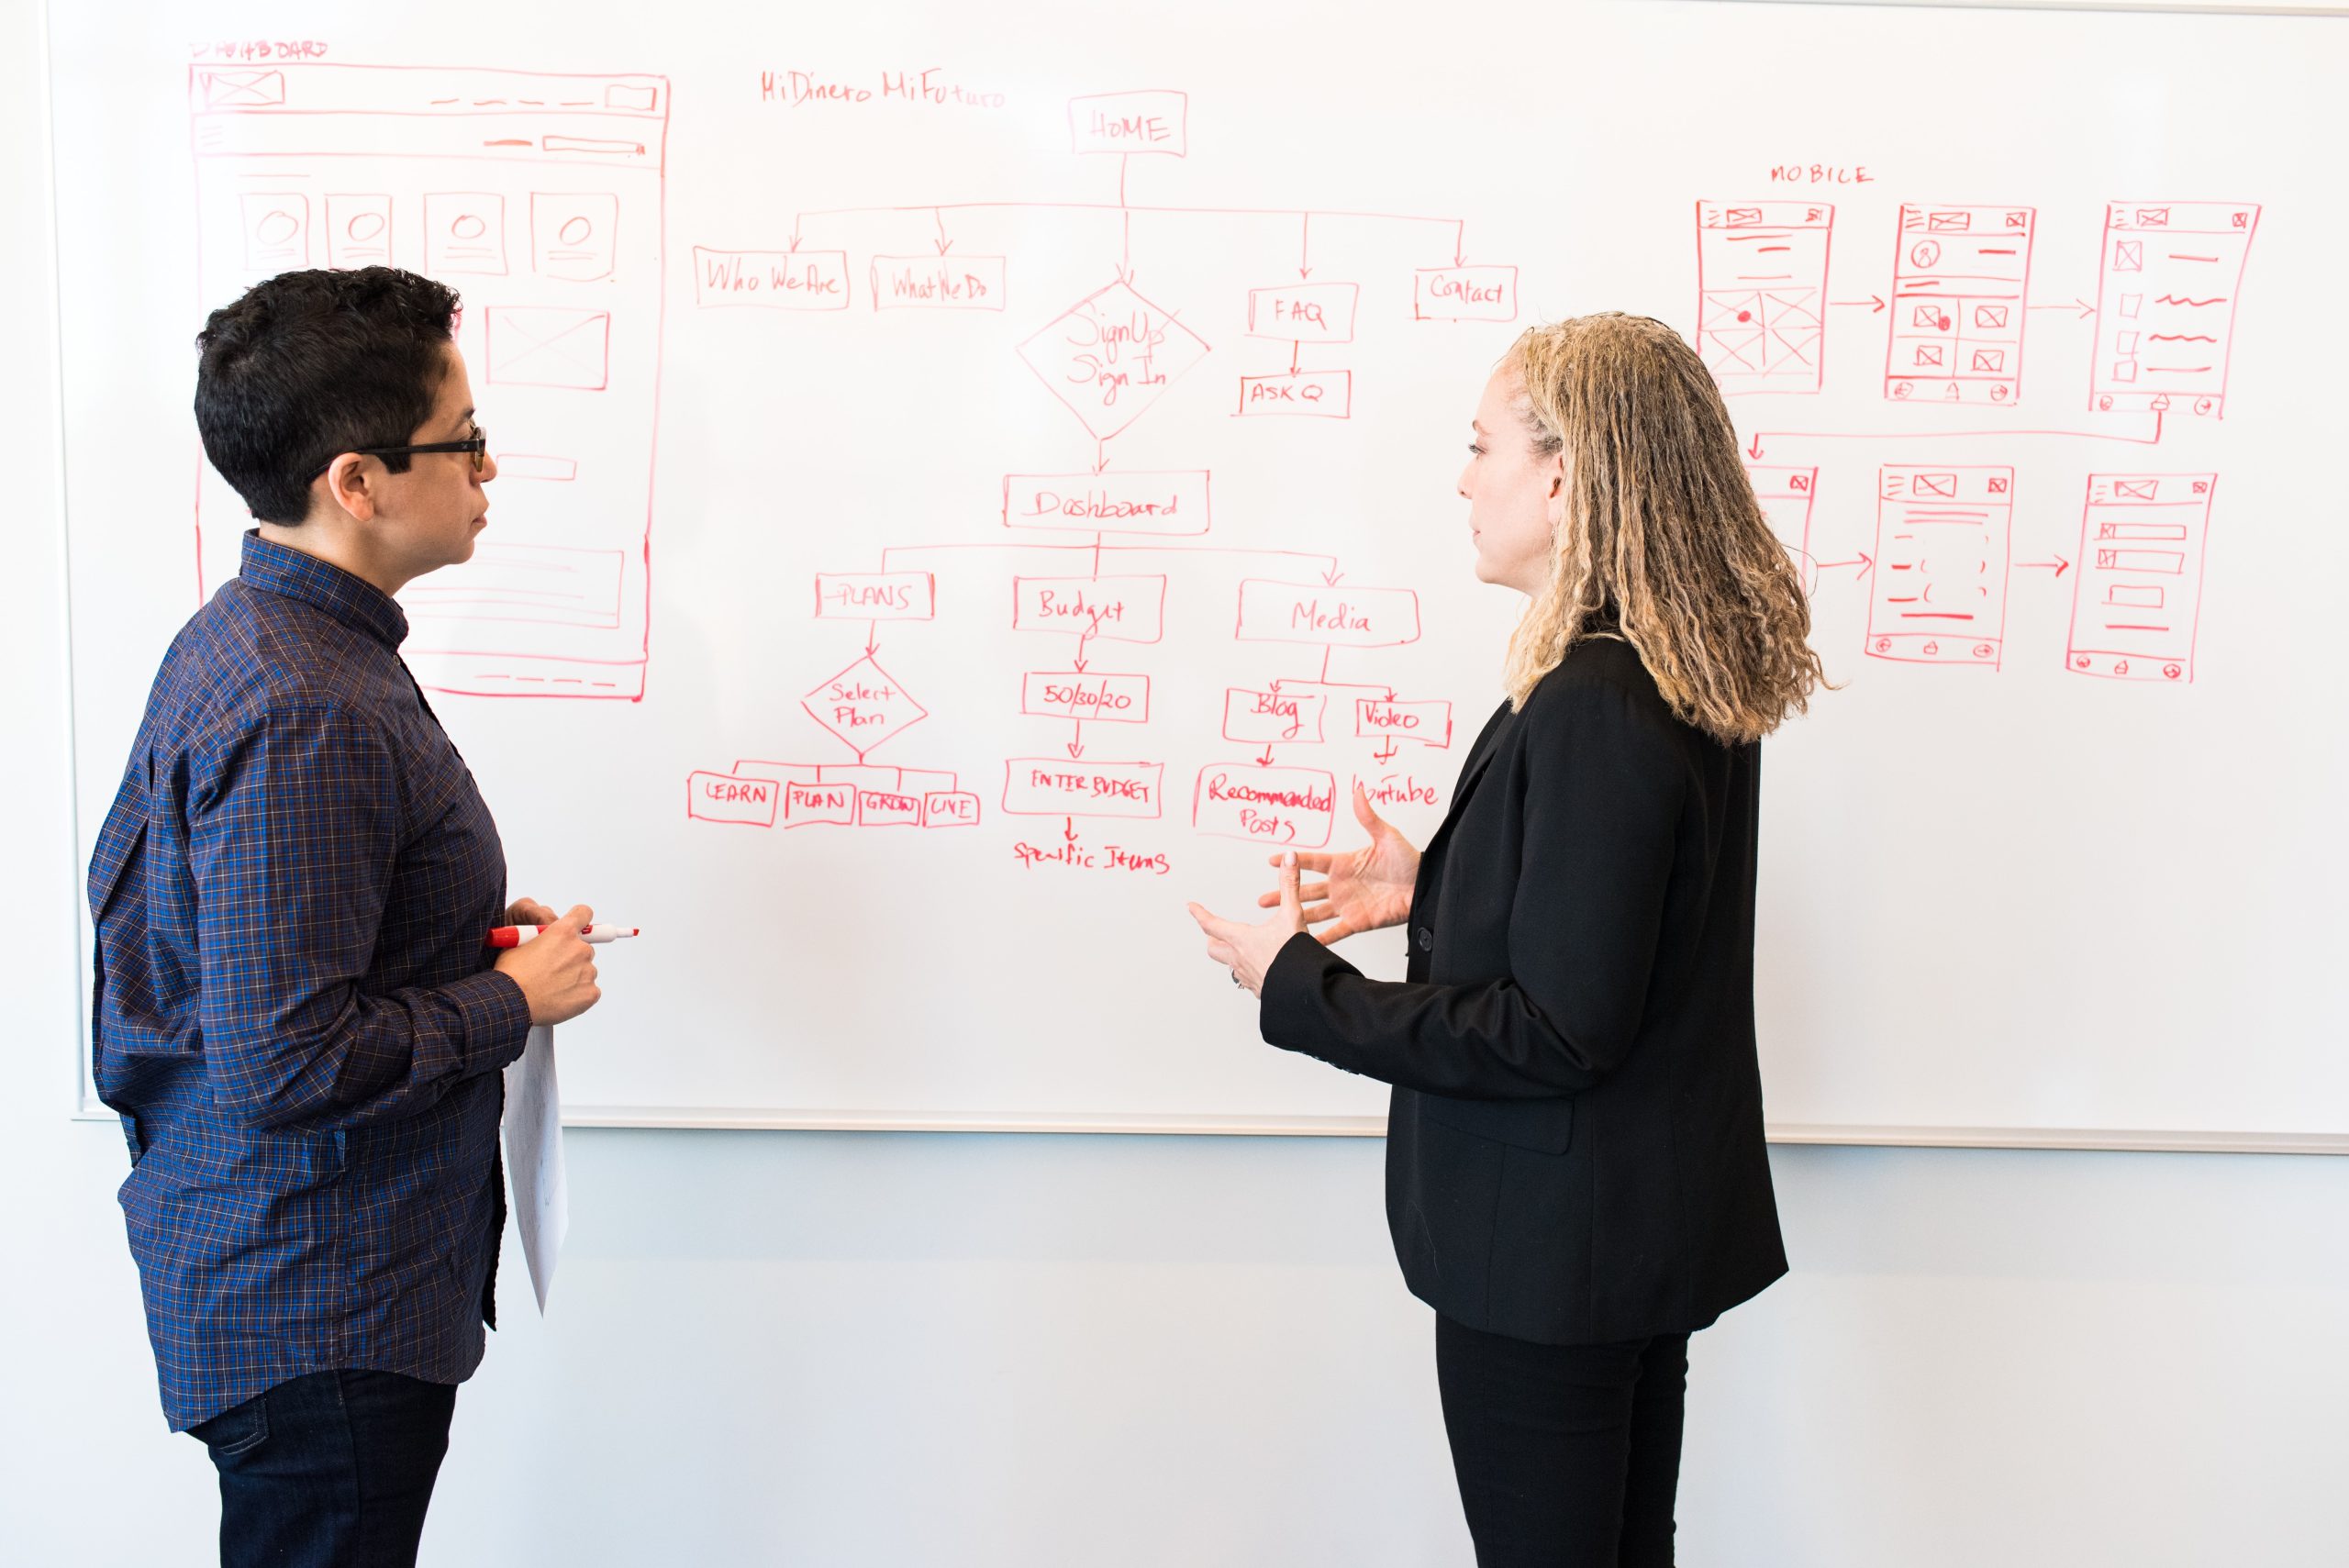 A marketing consultant working with her client to map a customer journey on a whiteboard.